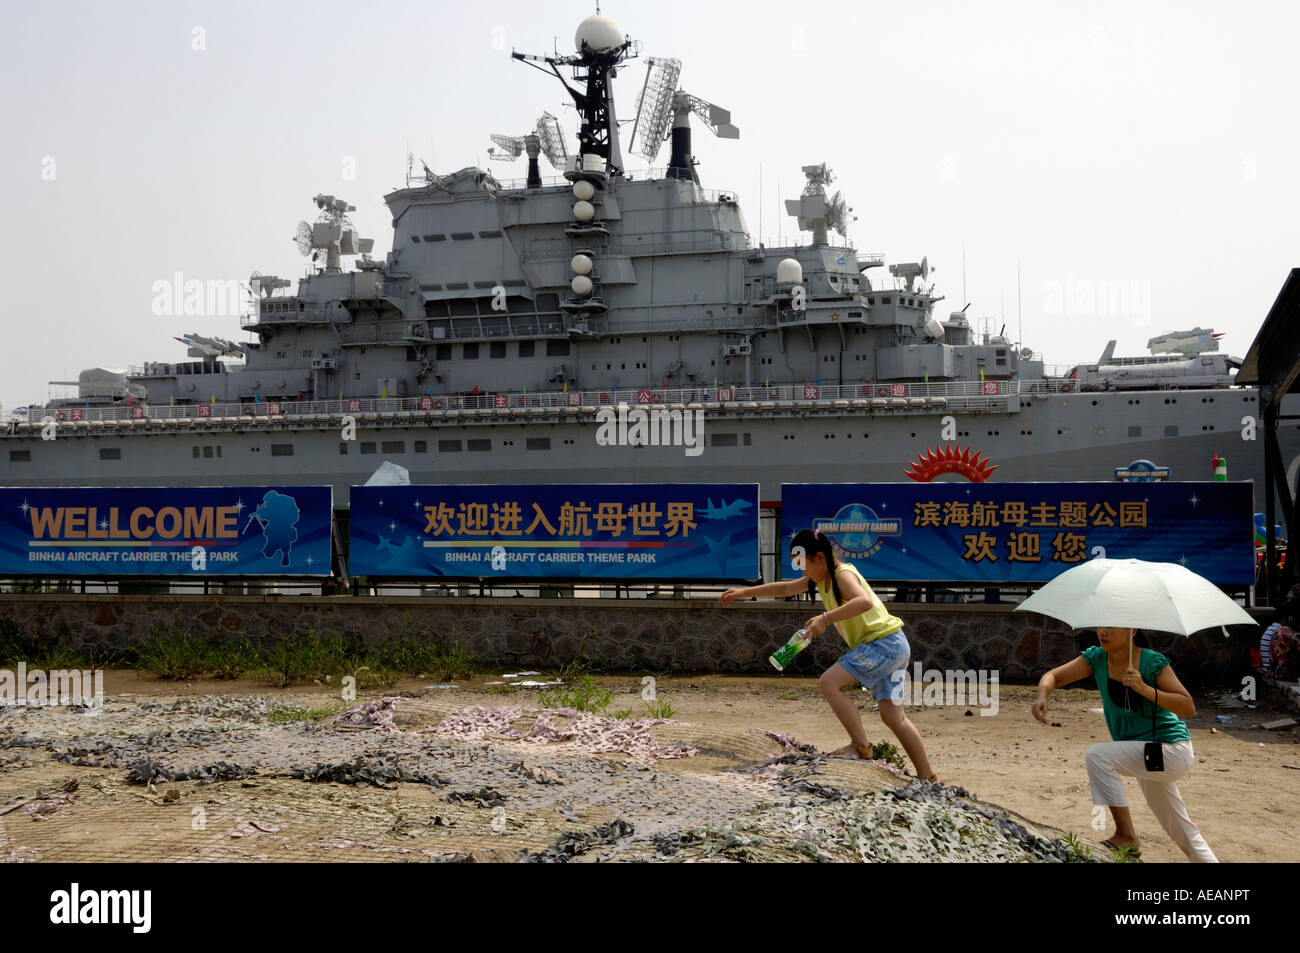 Soviet aircraft carrier Kiev in the military theme park in Tianjin China 19 Aug 2007 Stock Photo